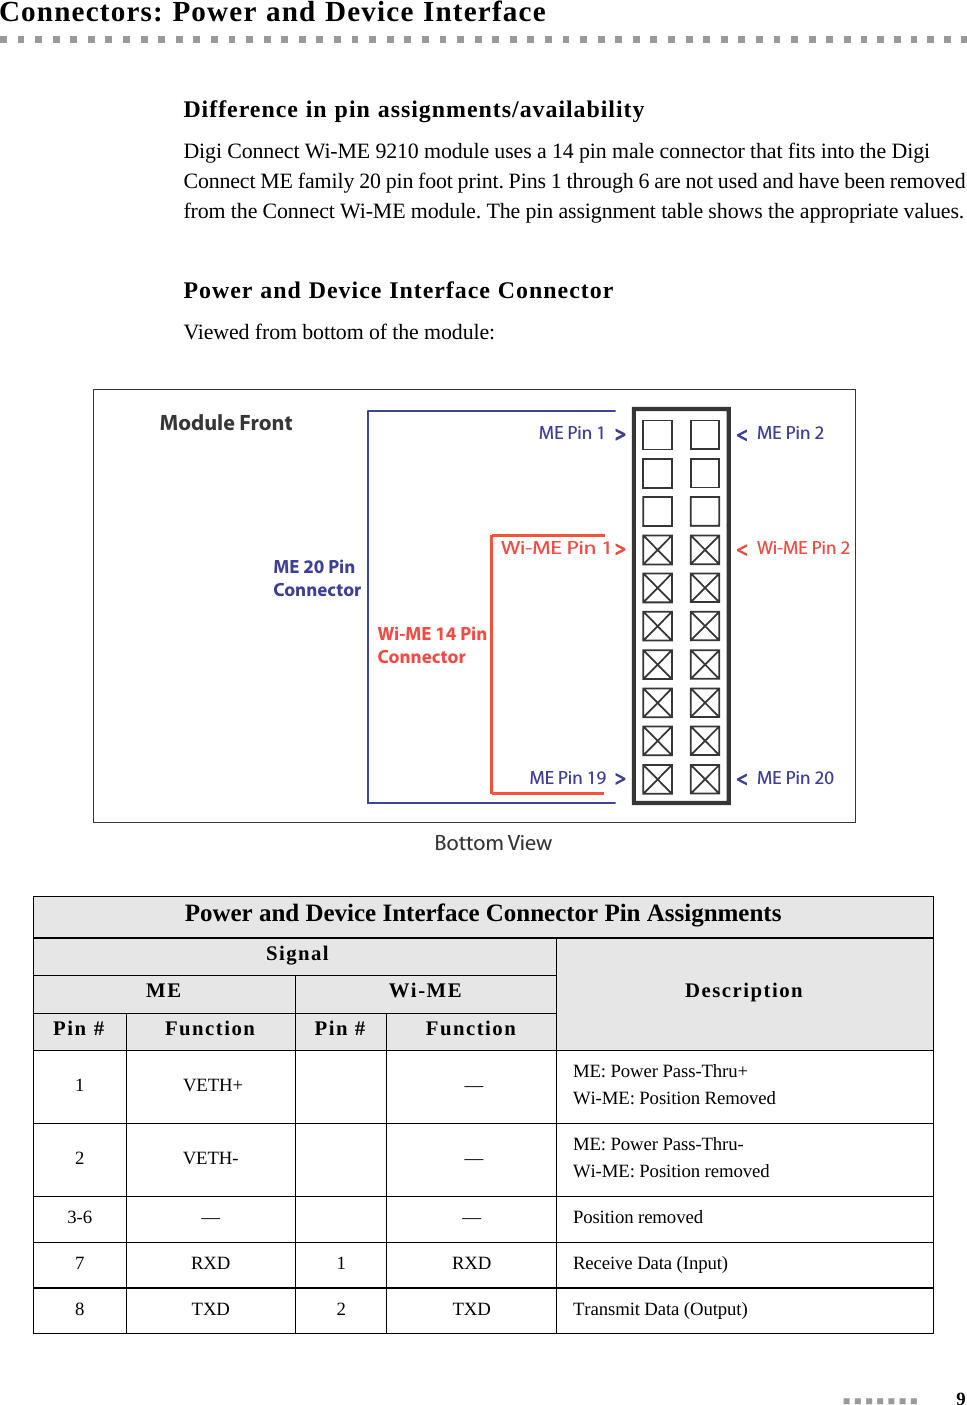  9Connectors: Power and Device InterfaceDifference in pin assignments/availabilityDigi Connect Wi-ME 9210 module uses a 14 pin male connector that fits into the Digi Connect ME family 20 pin foot print. Pins 1 through 6 are not used and have been removed from the Connect Wi-ME module. The pin assignment table shows the appropriate values. Power and Device Interface ConnectorViewed from bottom of the module:Module FrontME 20 PinConnectorWi-ME 14 Pin ConnectorWi-ME Pin 2ME Pin 1 ME Pin 2ME Pin 19 ME Pin 20Wi-ME Pin 1&gt;&gt;&gt;&gt;&gt;&gt;Bottom ViewPower and Device Interface Connector Pin Assignments SignalDescriptionME Wi-MEPin # Function Pin # Function1  VETH+  — ME: Power Pass-Thru+Wi-ME: Position Removed2 VETH-  — ME: Power Pass-Thru-Wi-ME: Position removed3-6 — — Position removed7 RXD 1 RXD Receive Data (Input)8 TXD 2 TXD Transmit Data (Output)